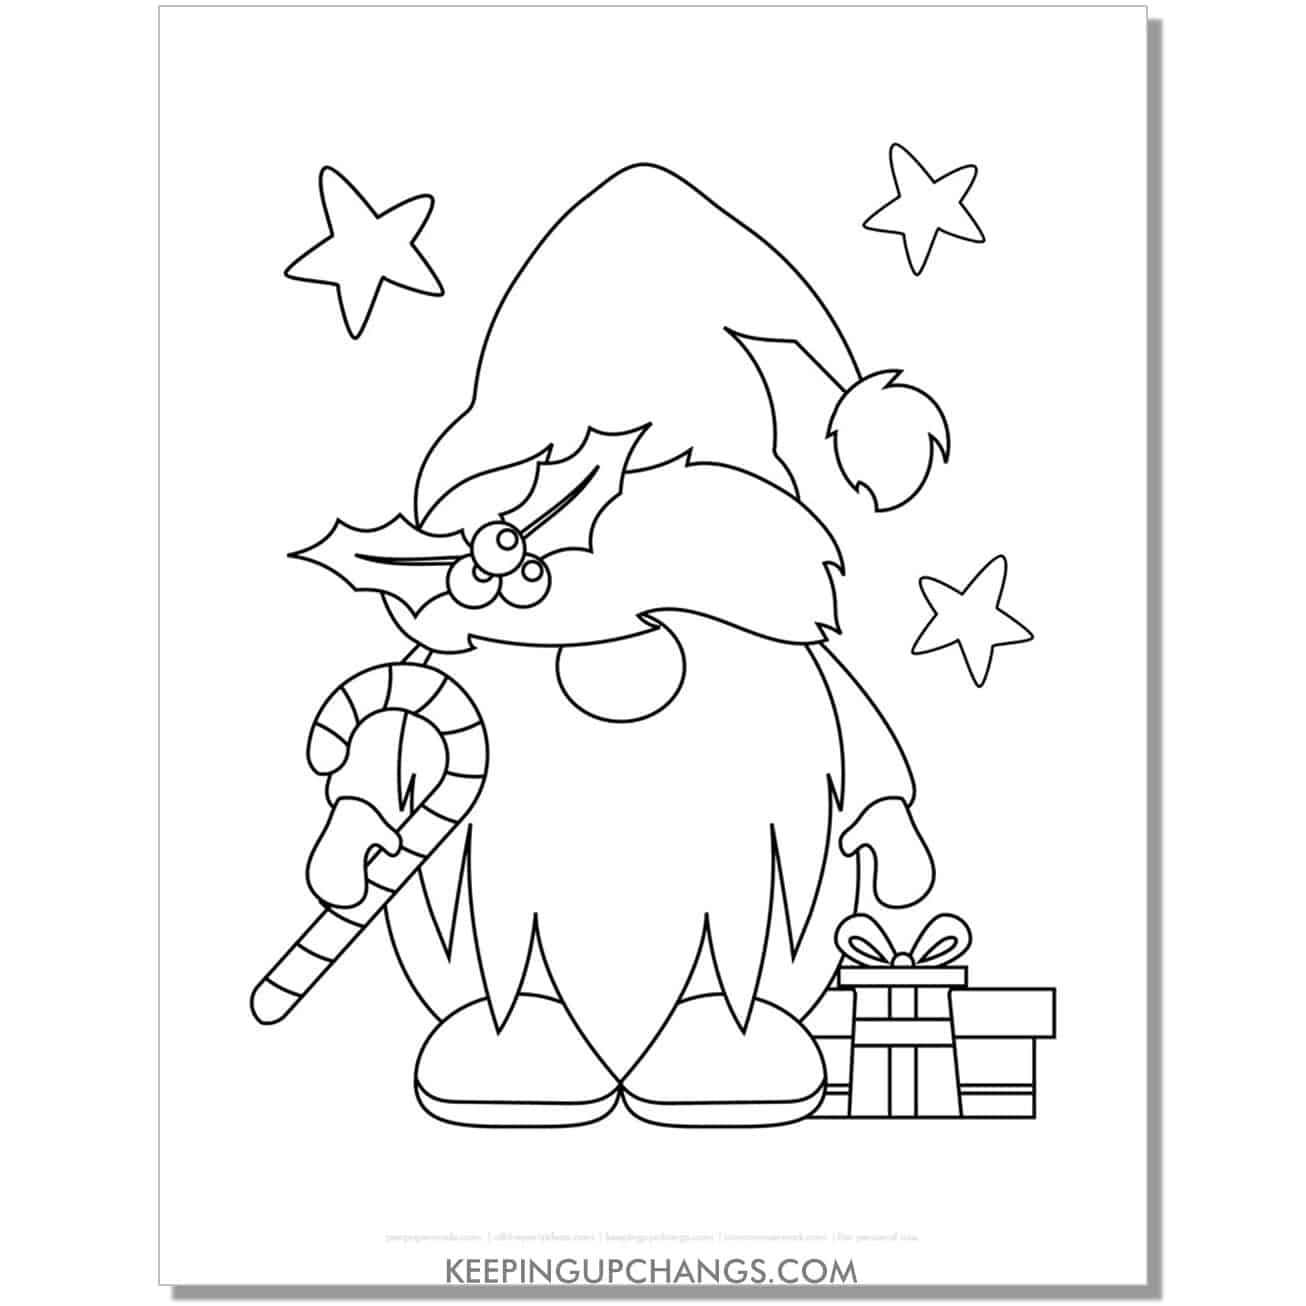 free christmas gnome with candy cane, holly, presents coloring page.